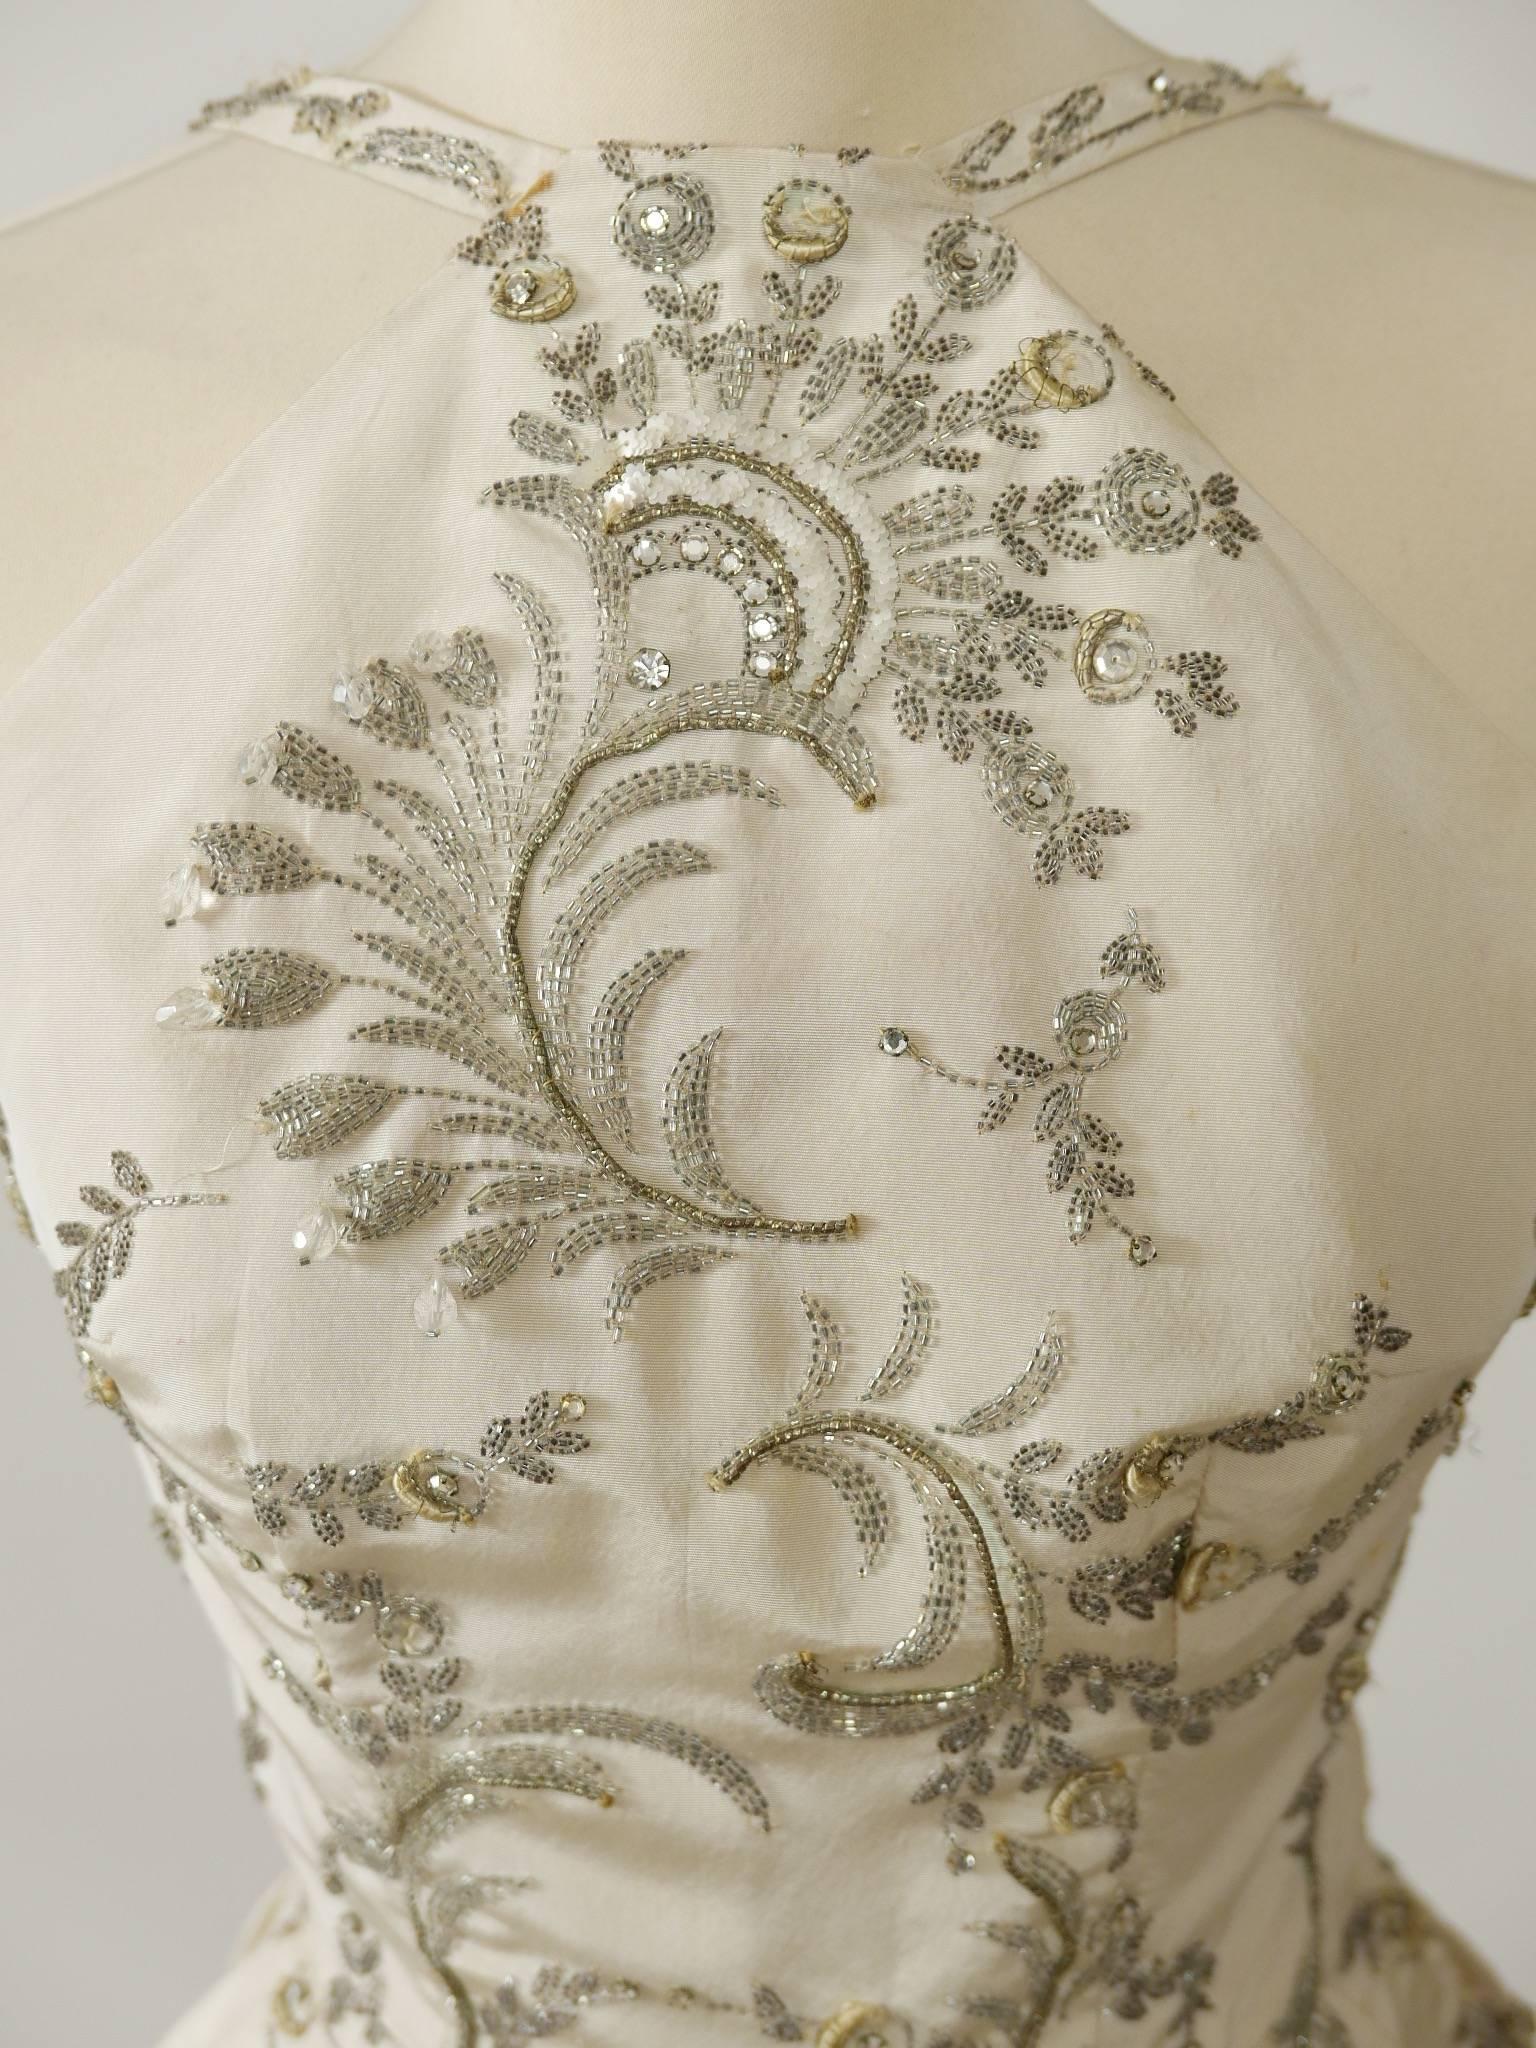 Women's 1950s White Ivory Satin Embroidered Cocktail Dress